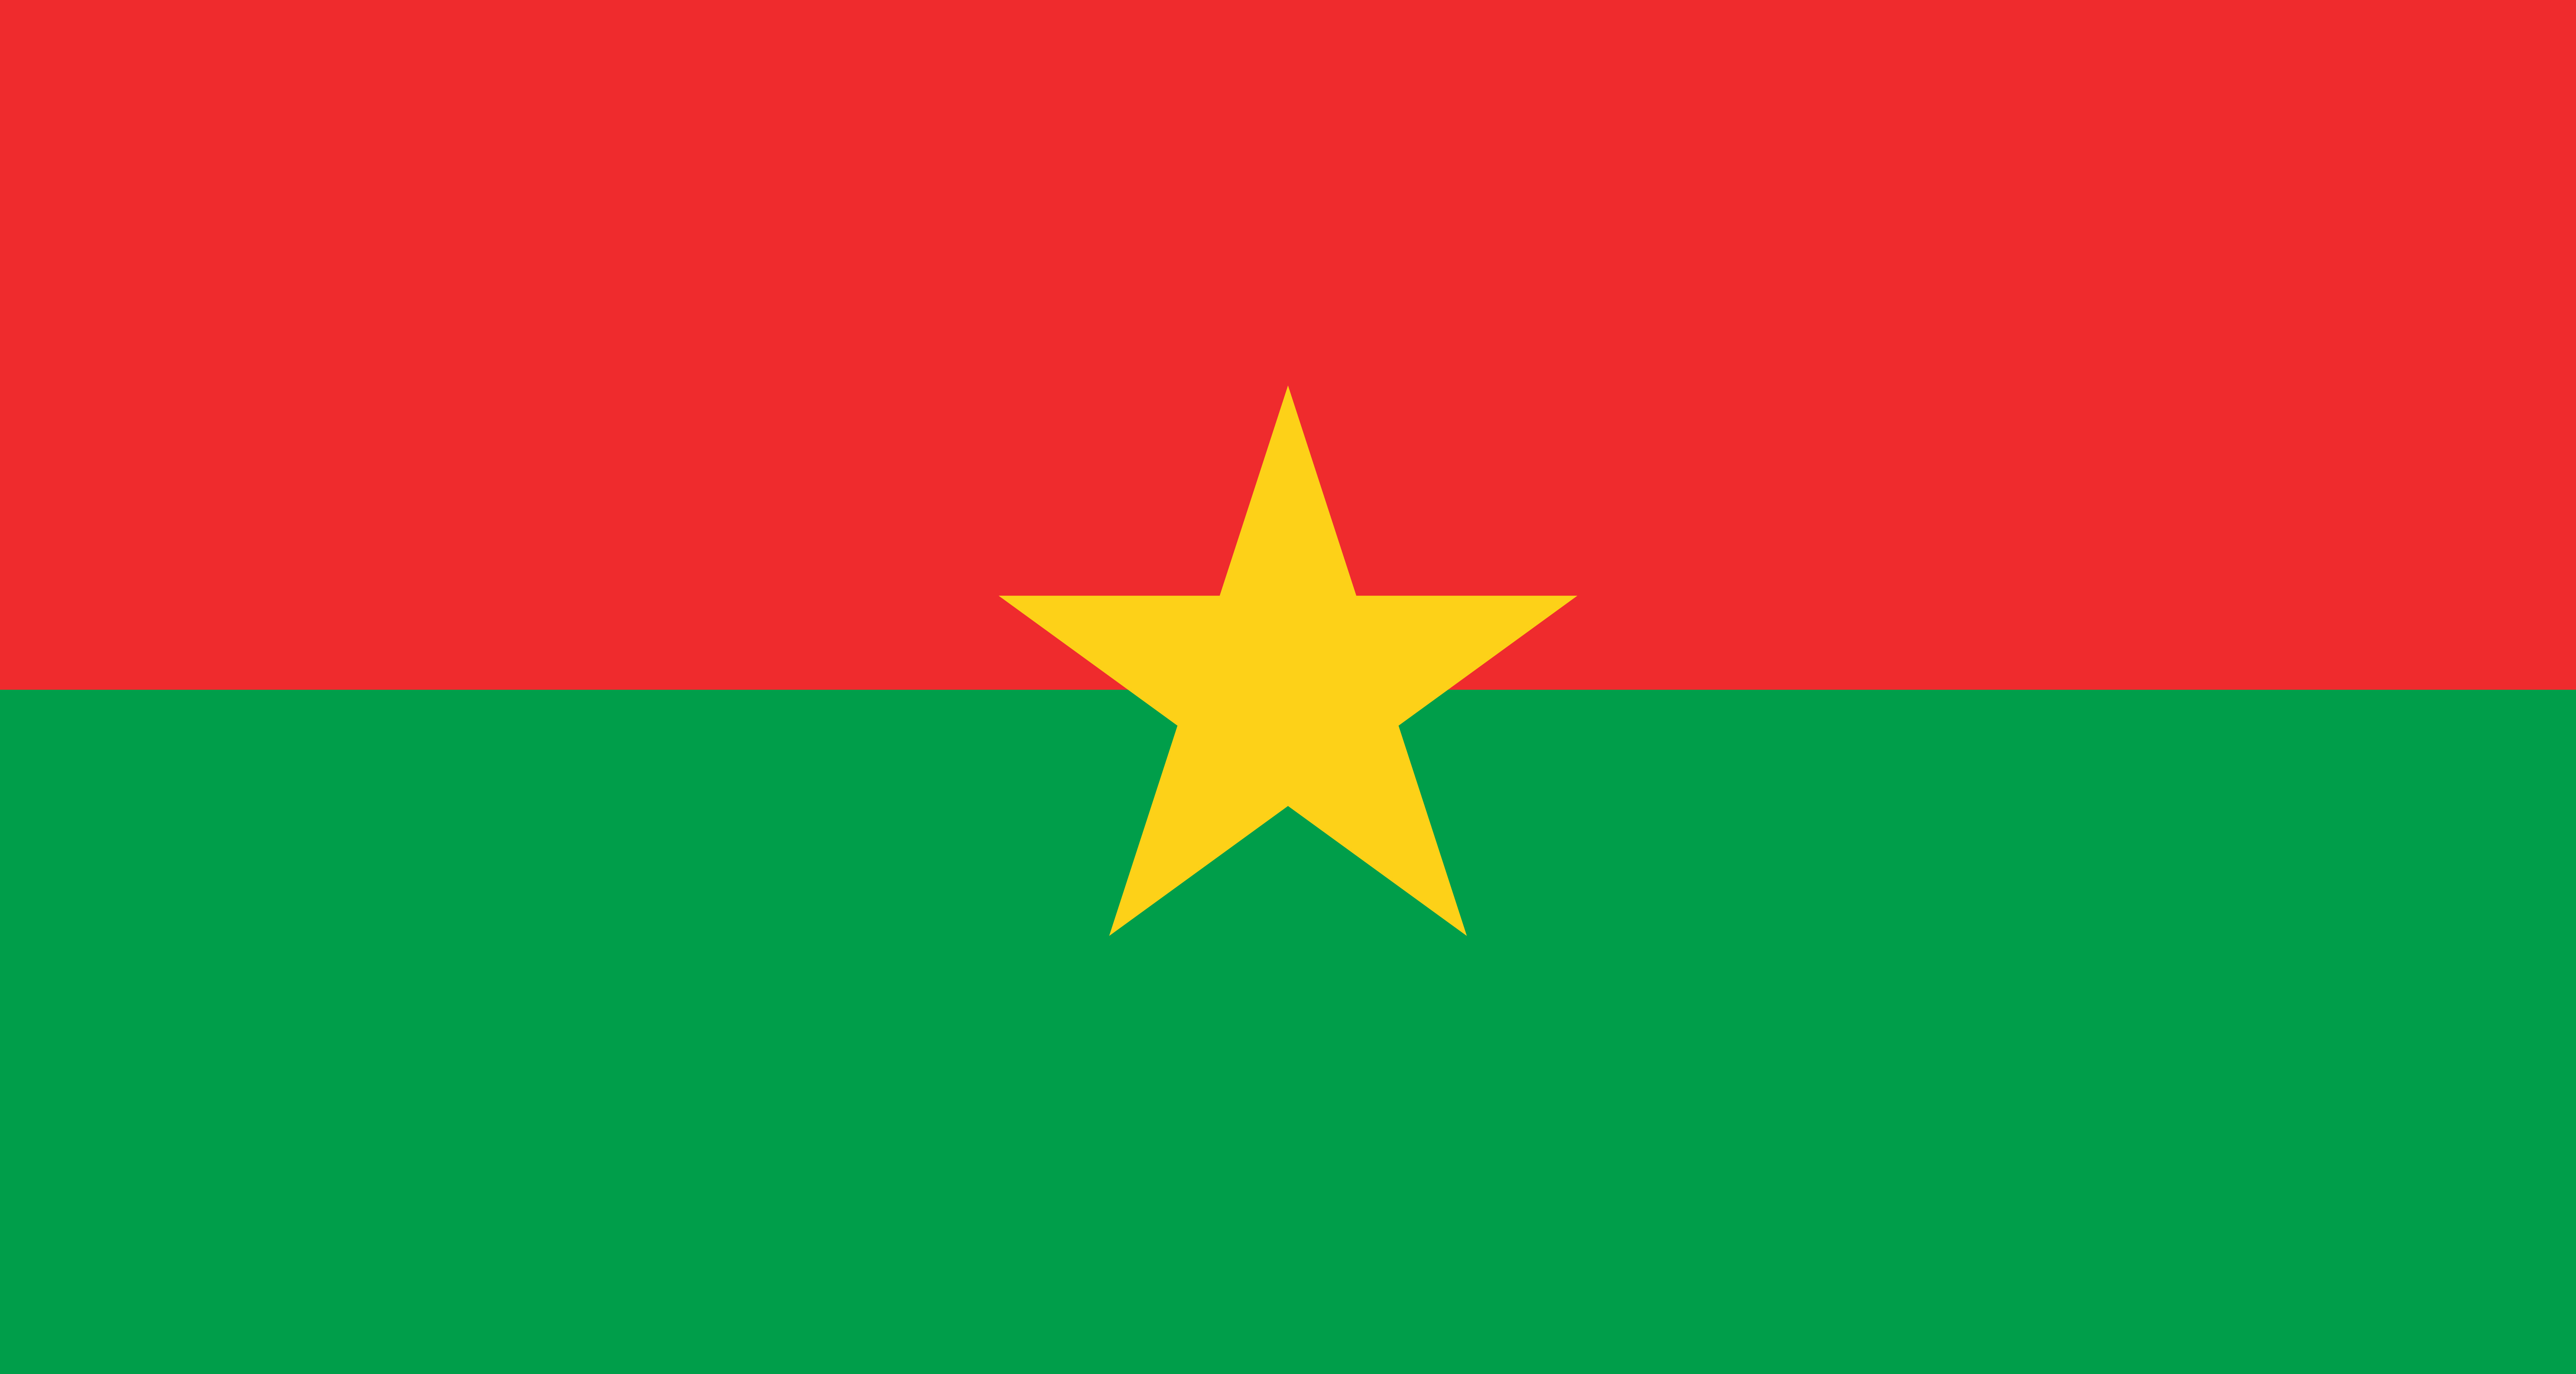 Burkina Faso updates its national implementation plan for the Stockholm Convention